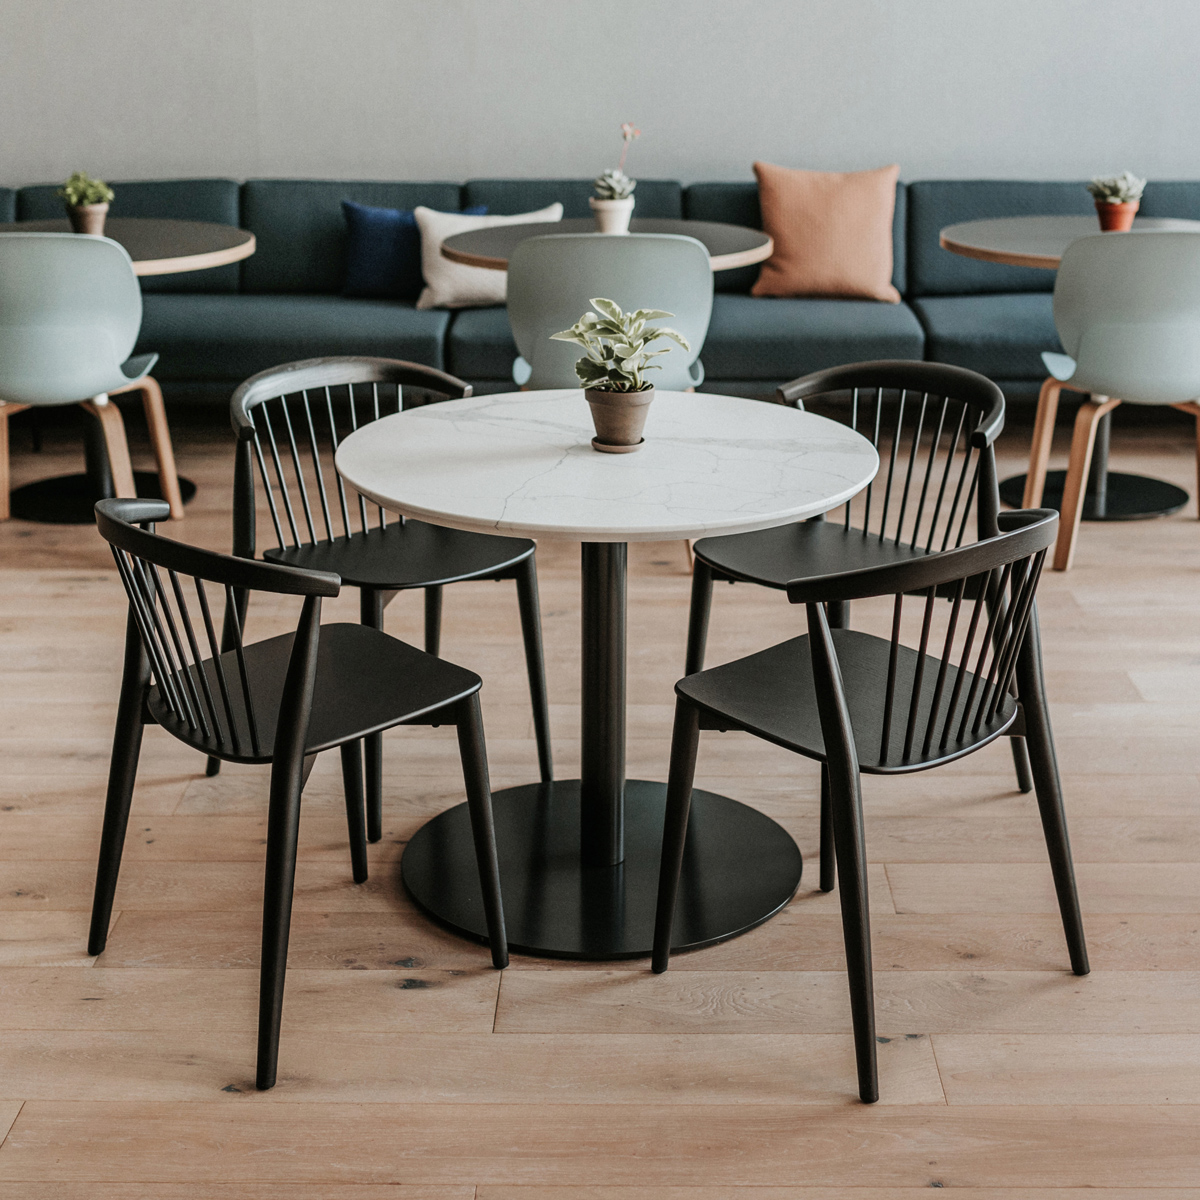 Four chairs surrounding a circular table